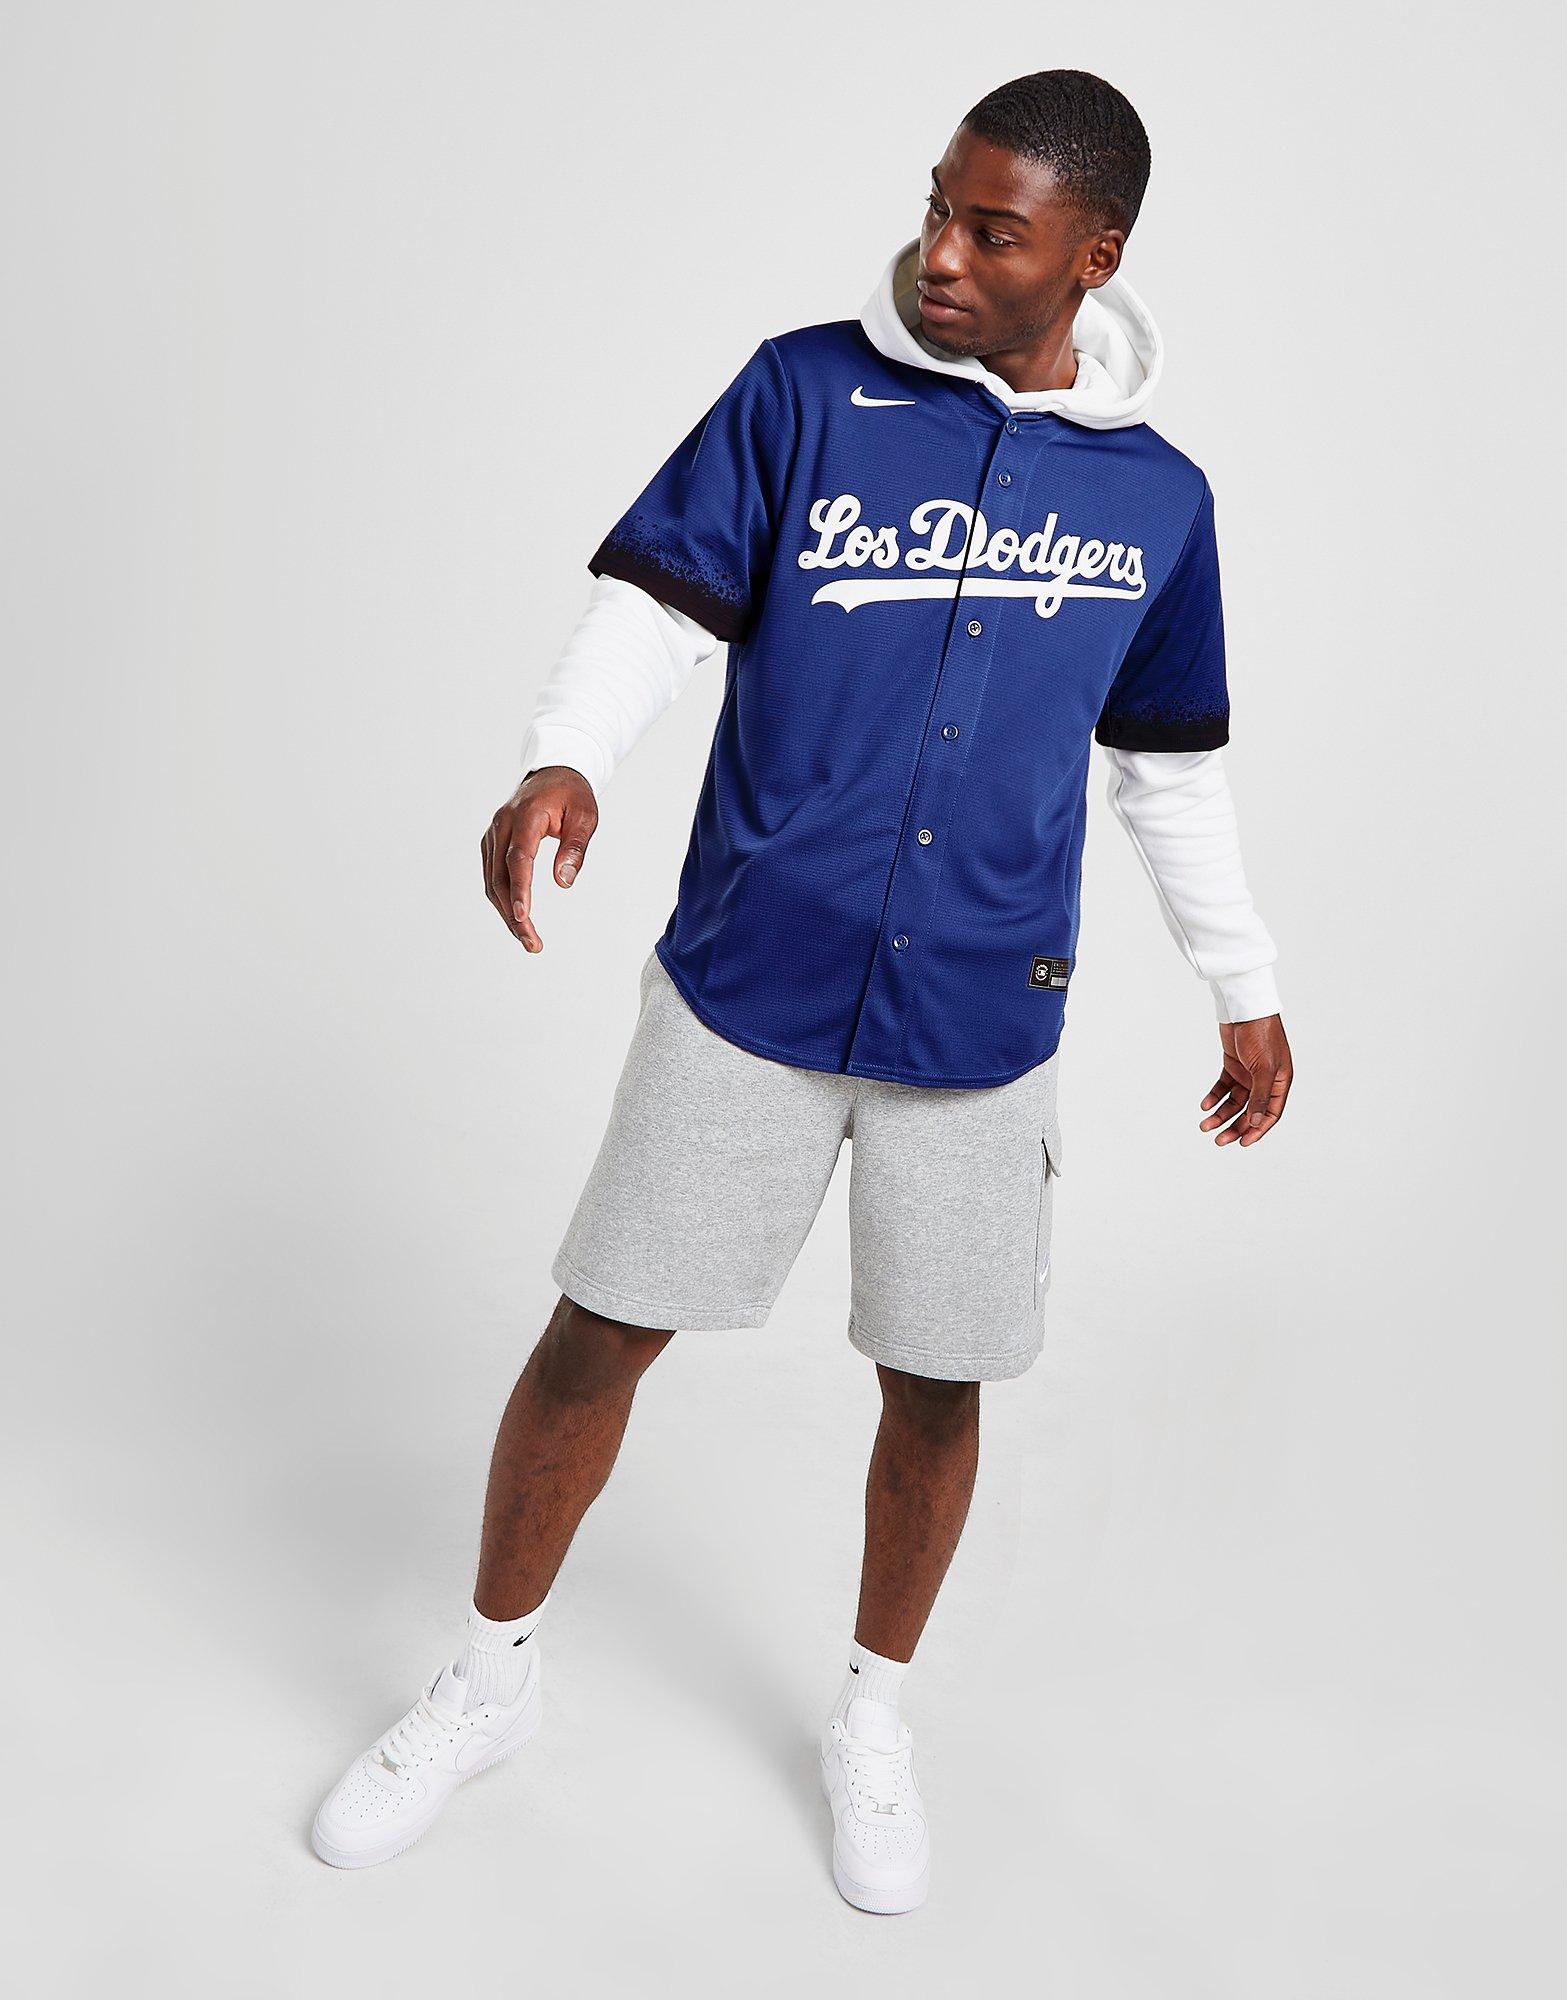 mens dodgers jersey outfit